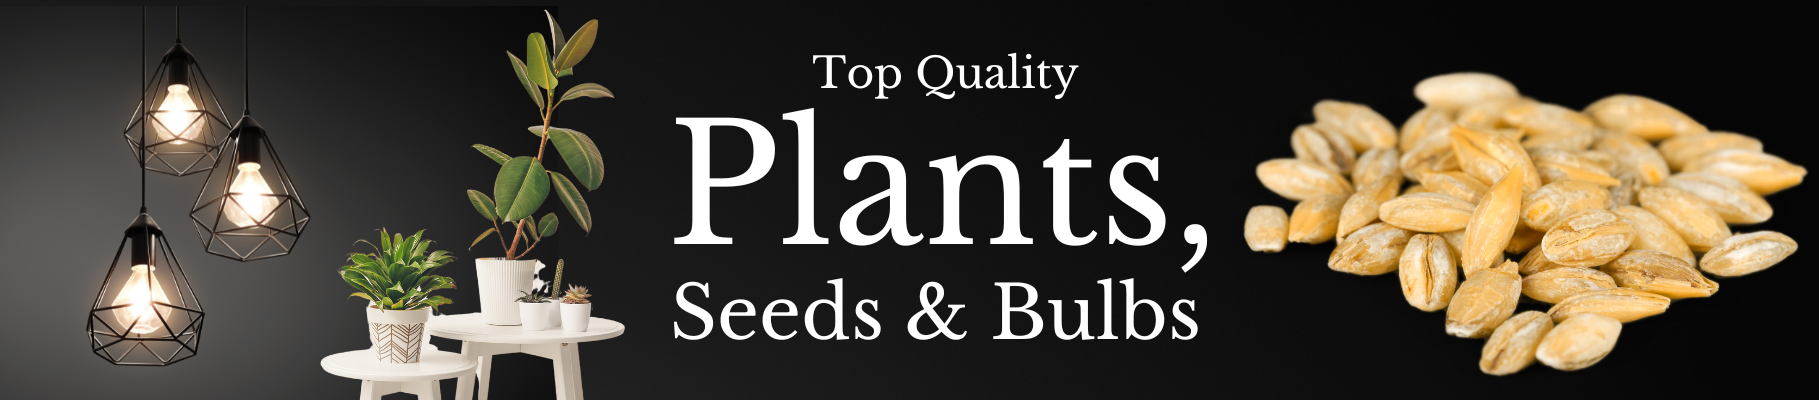 best plants, seeds and bulbs